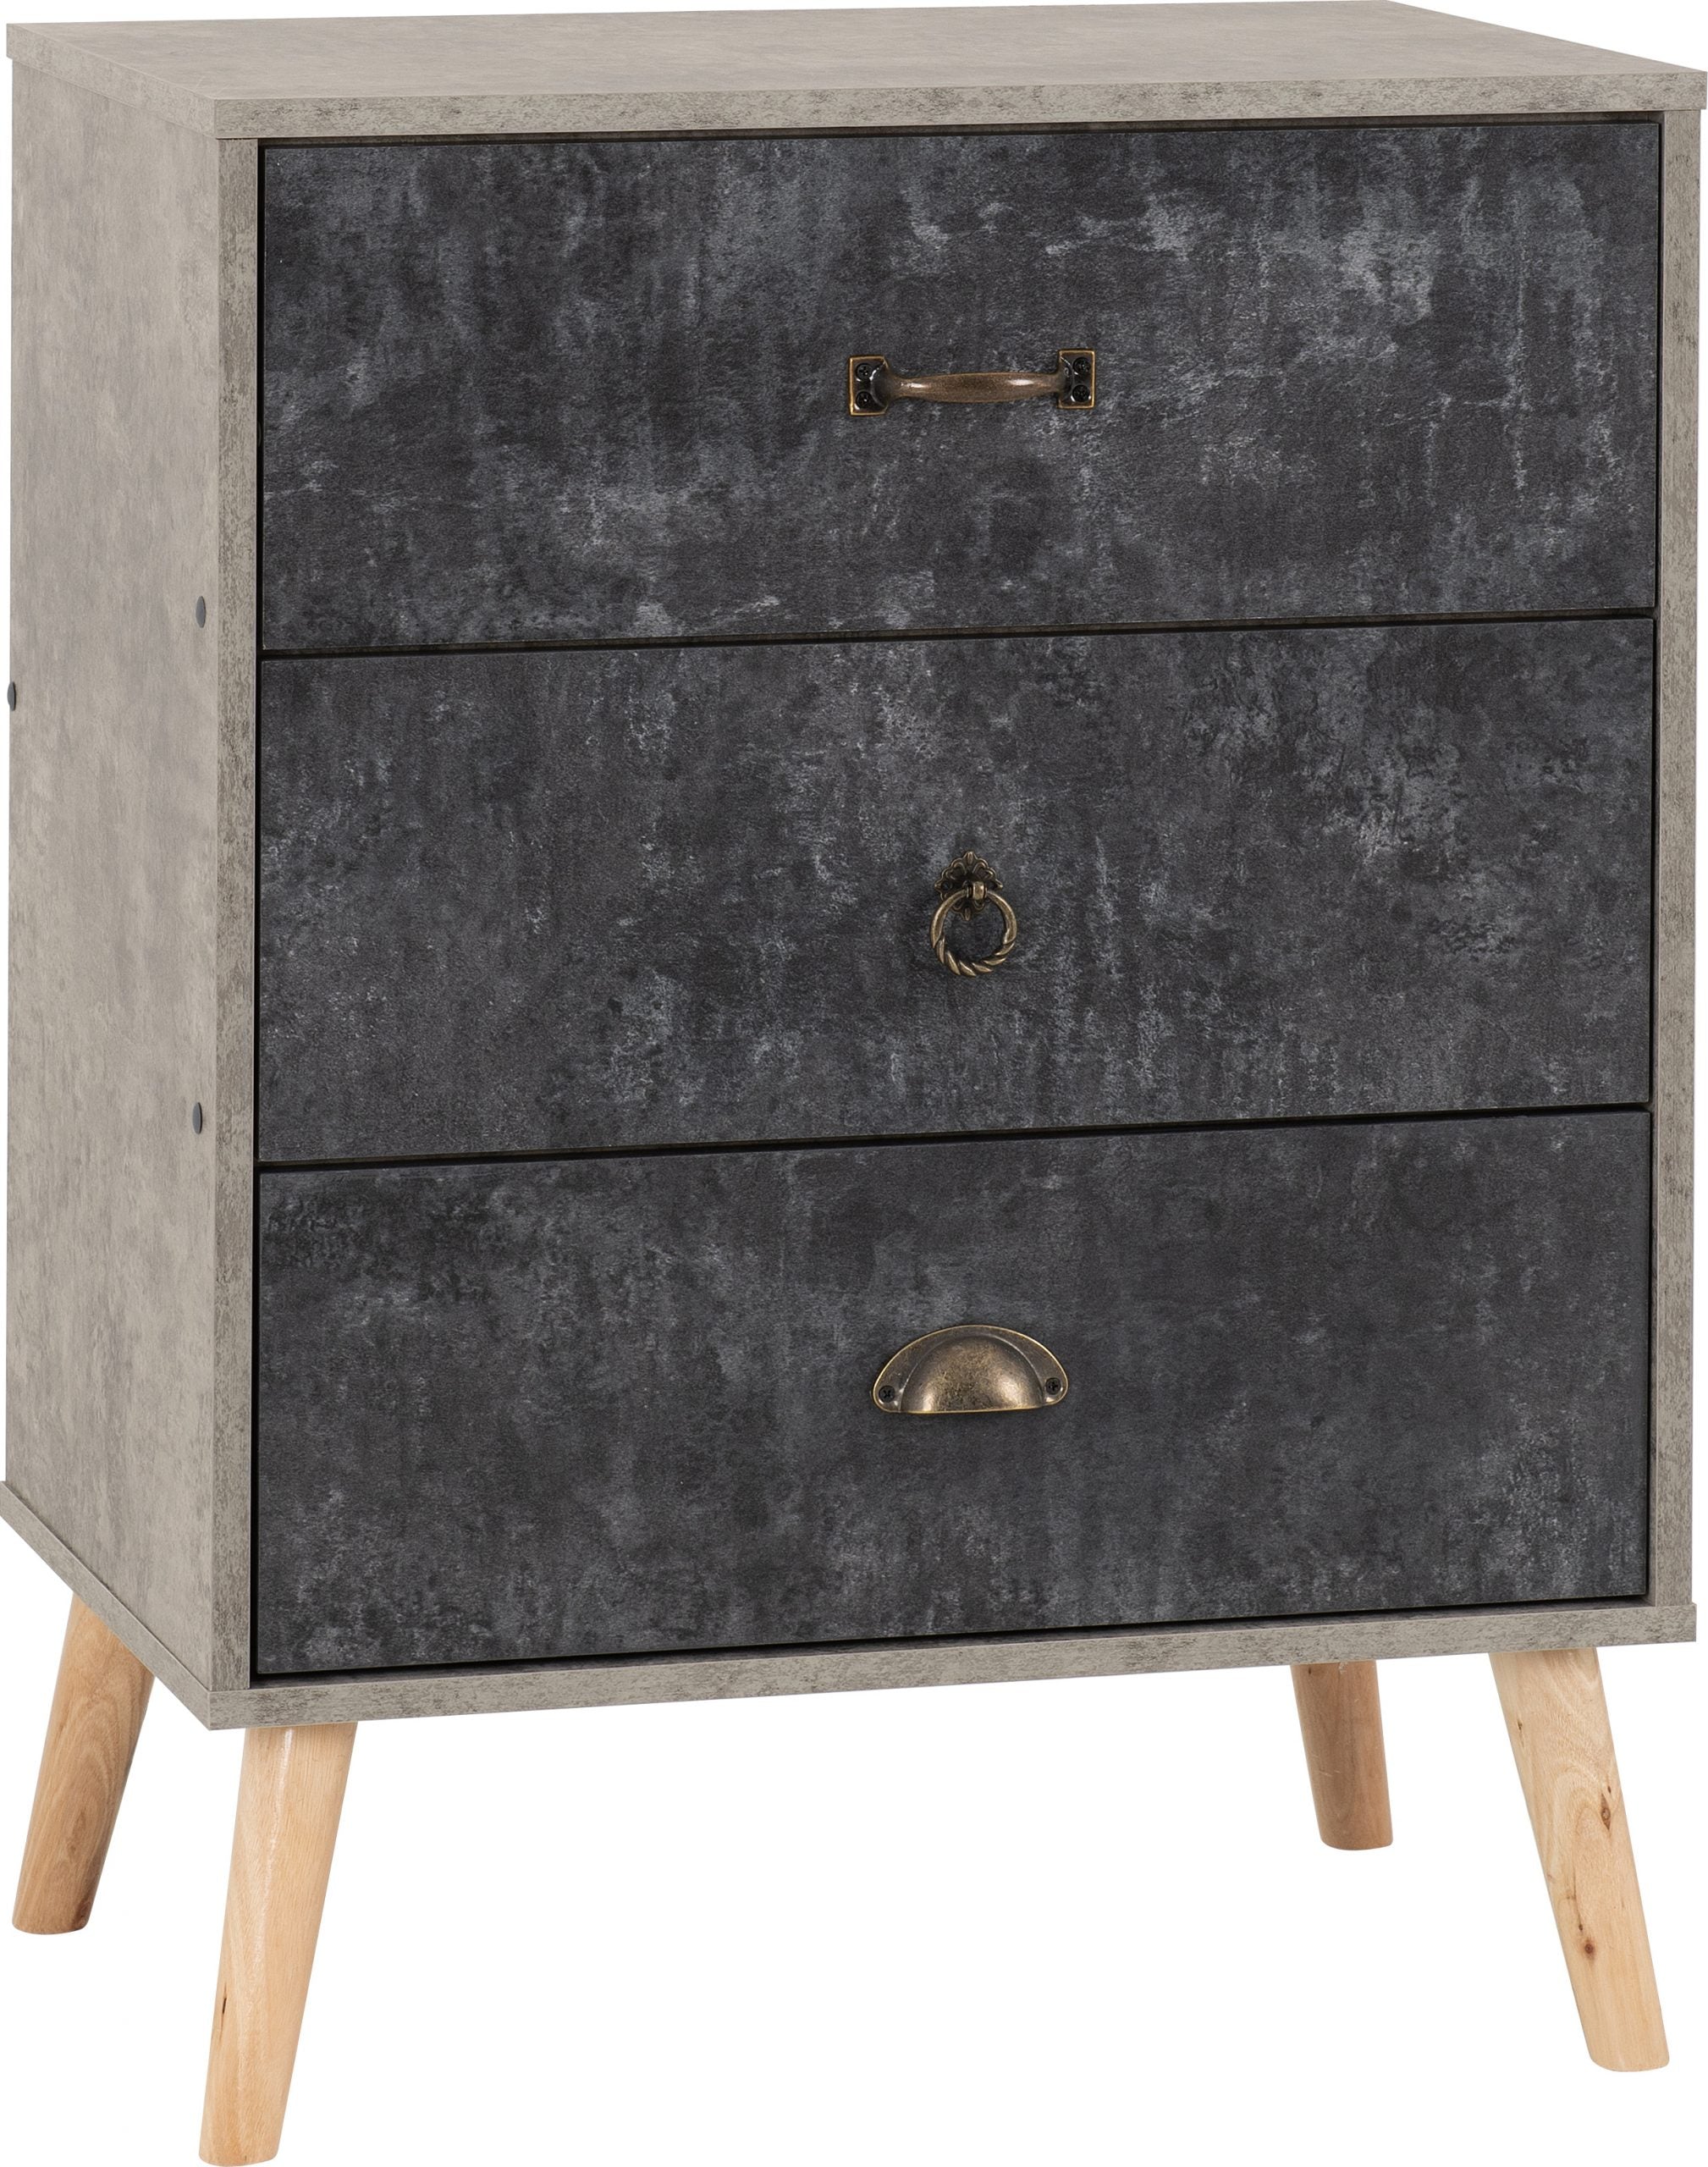 Nordic 3 Drawer Chest Concrete Effect/Charcoal